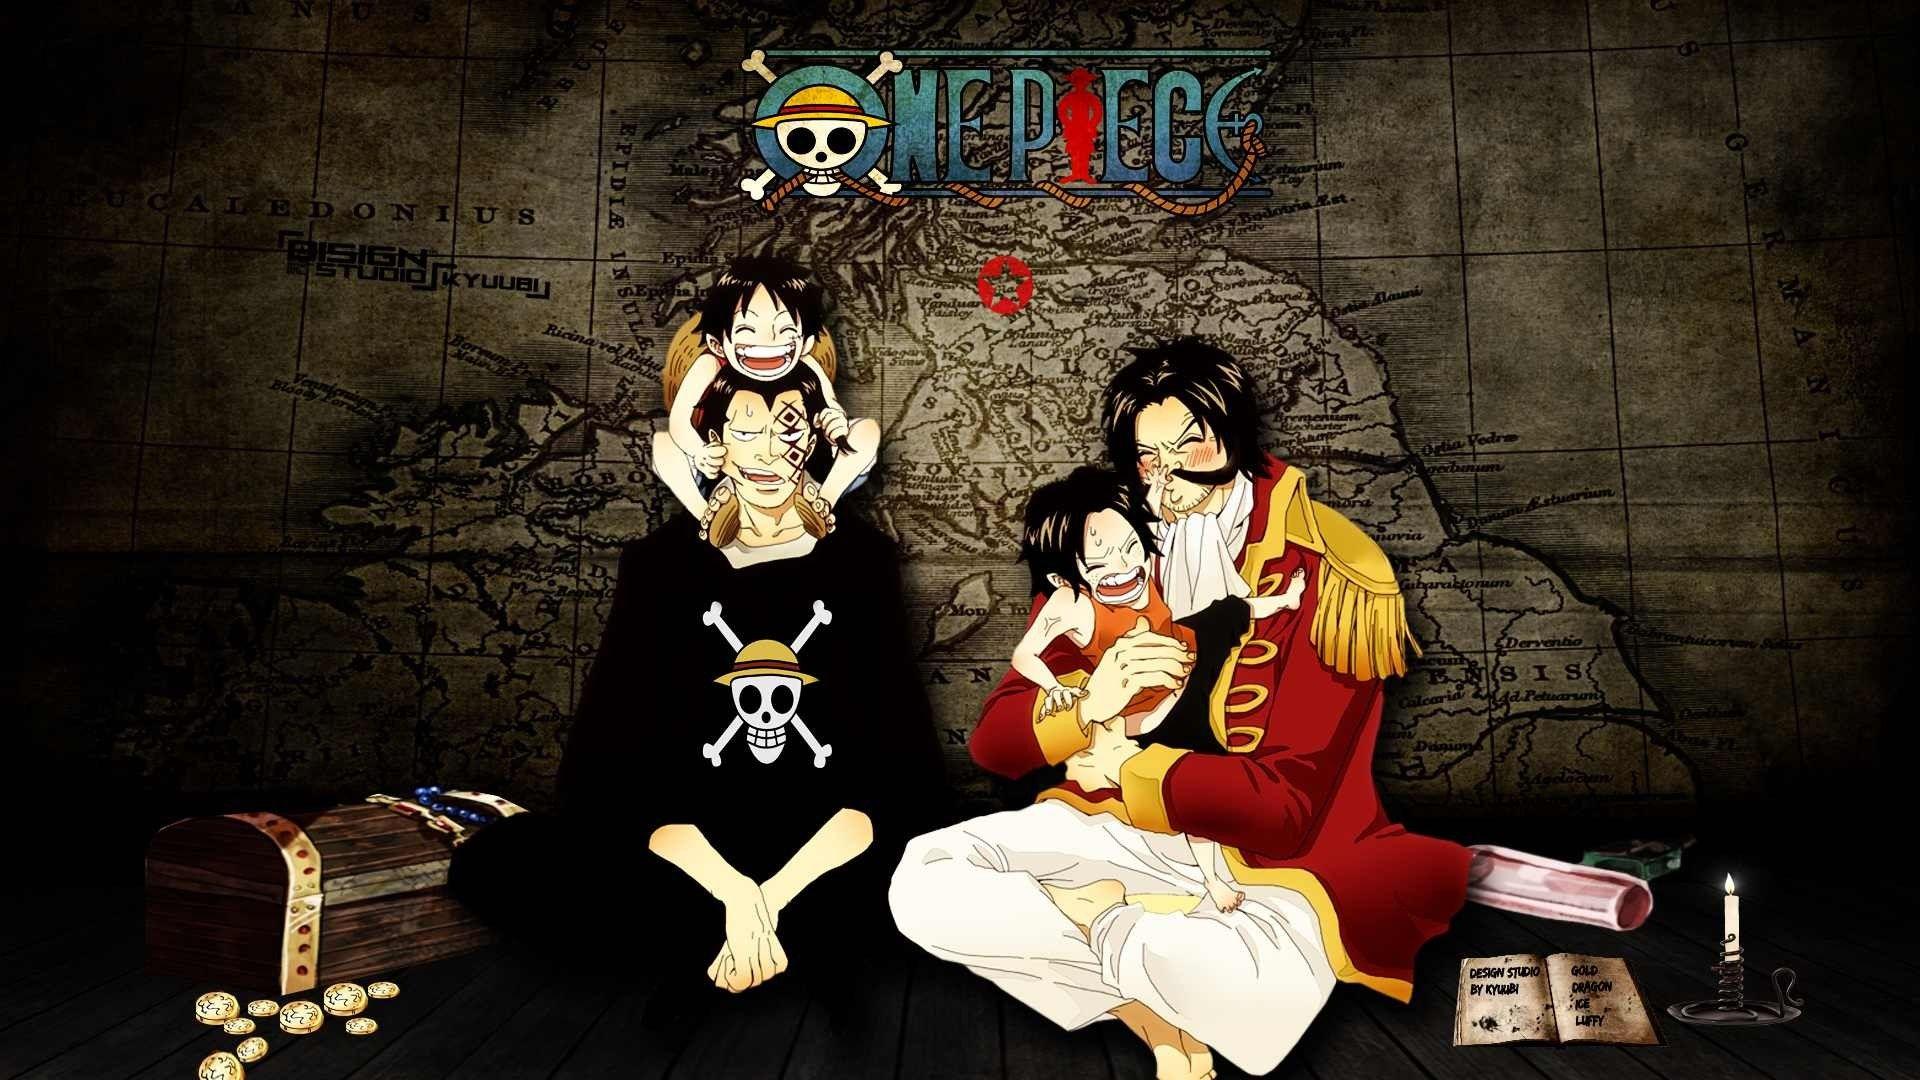 21963) One Piece Gol D Roger Full HD Wallpapers